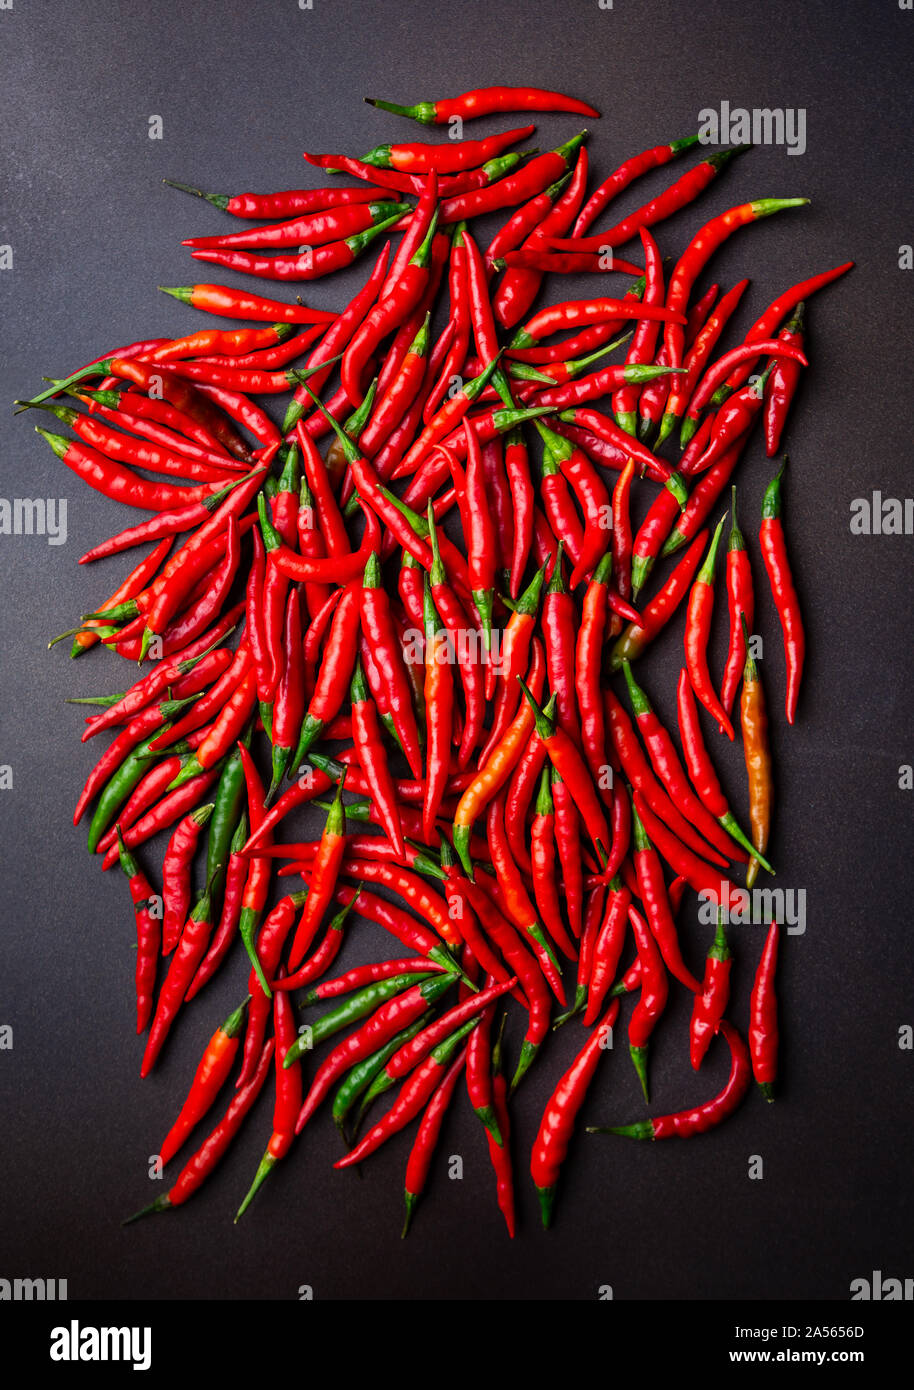 Overhead view of freshly picked red Cayenne peppers Stock Photo